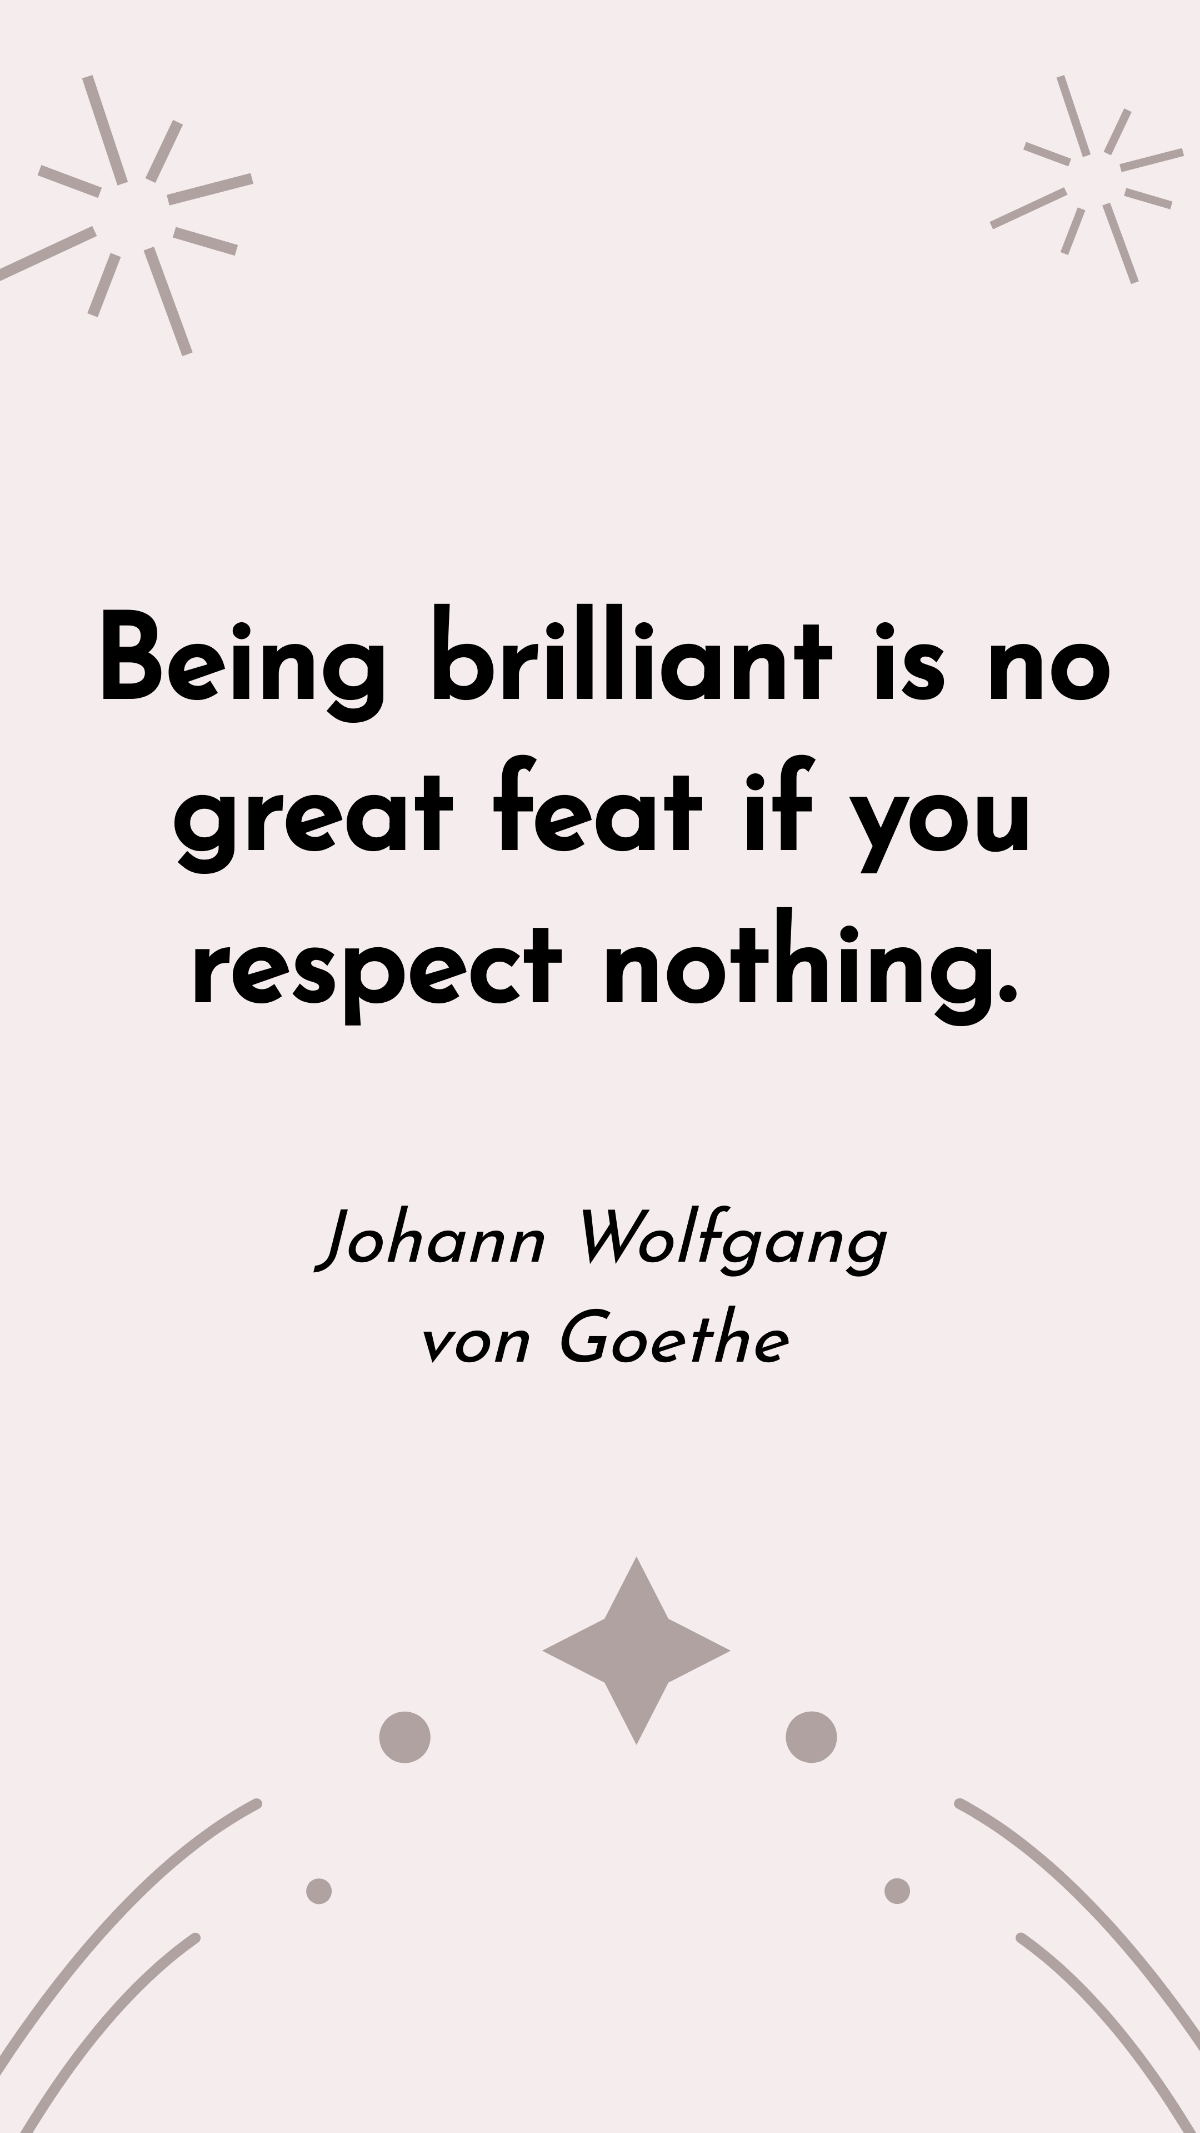 Johann Wolfgang von Goethe - Being brilliant is no great feat if you respect nothing. Template